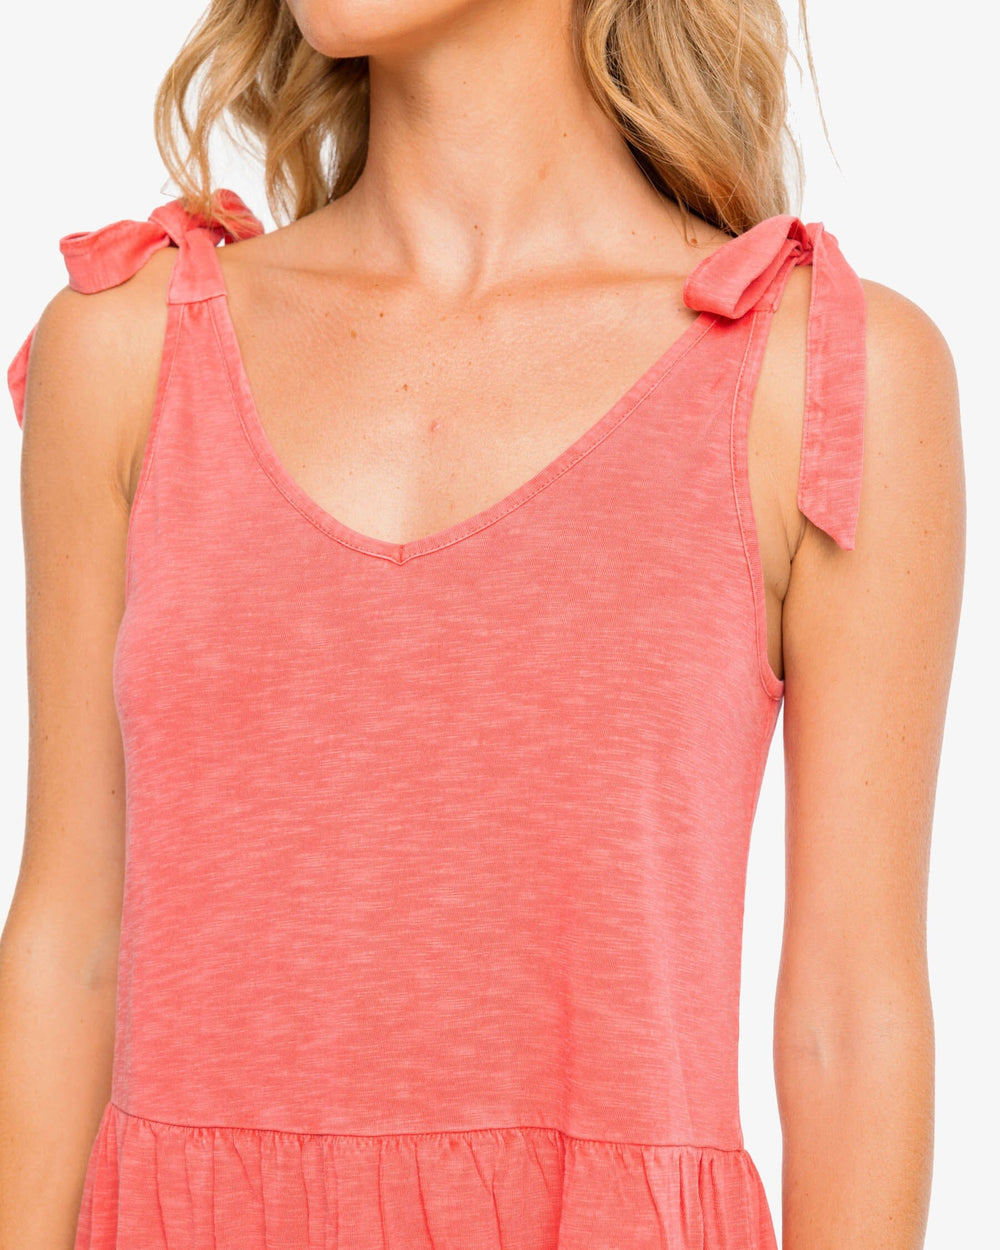 The detail view of the Southern Tide Nicole Sun Farer Tiered Tank Dress by Southern Tide - Sunkist Coral